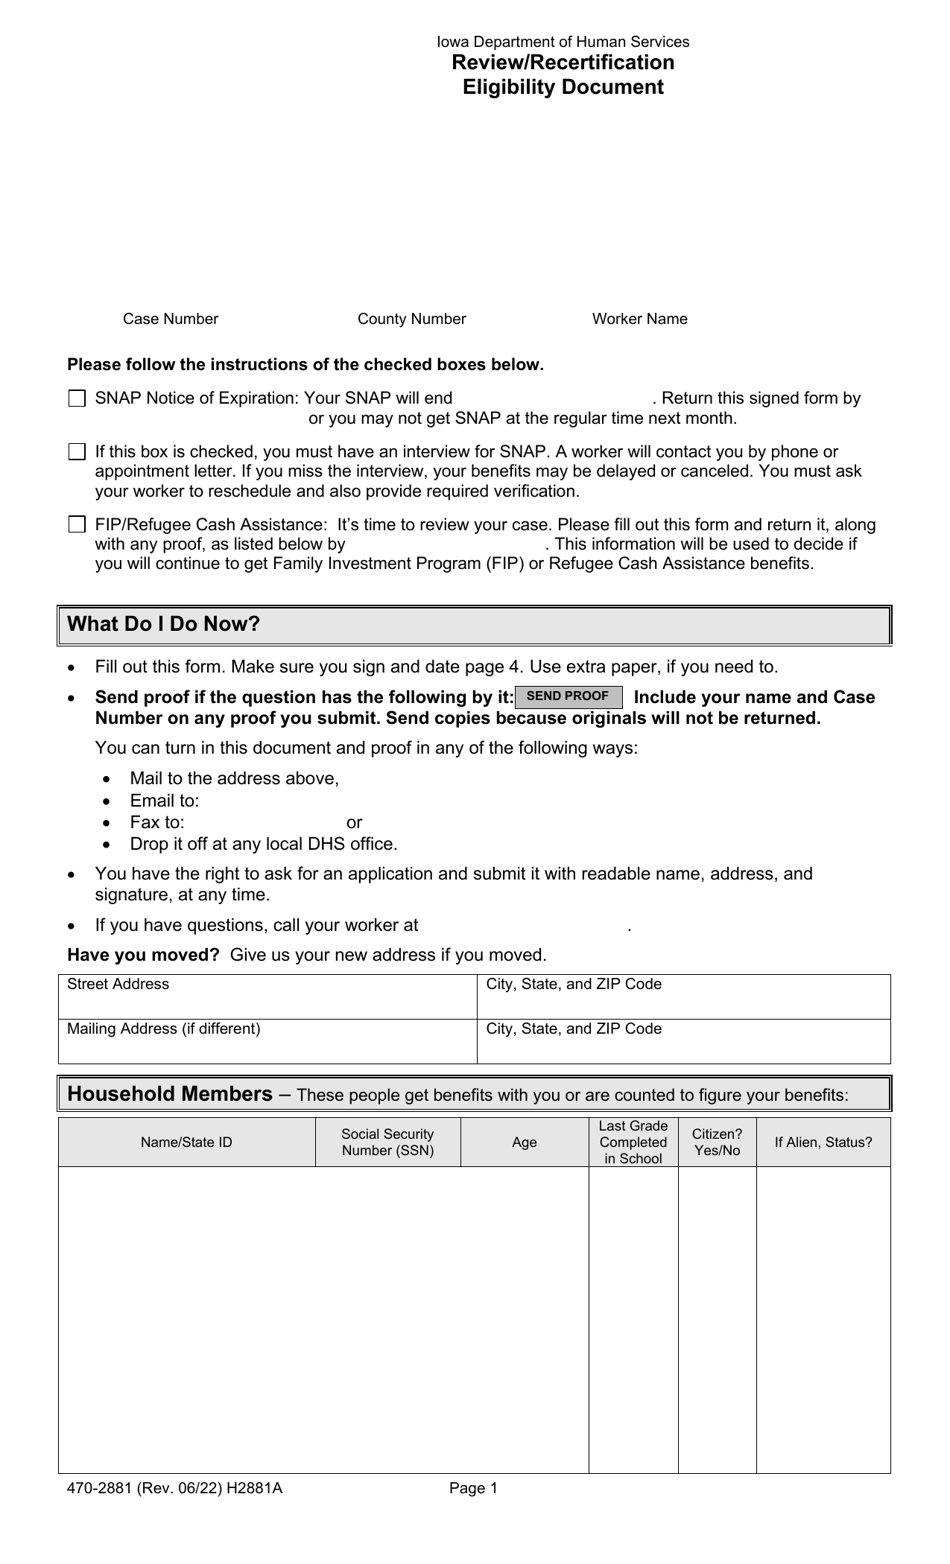 Form 470-2881 Review / Recertification Eligibility Document - Iowa, Page 1